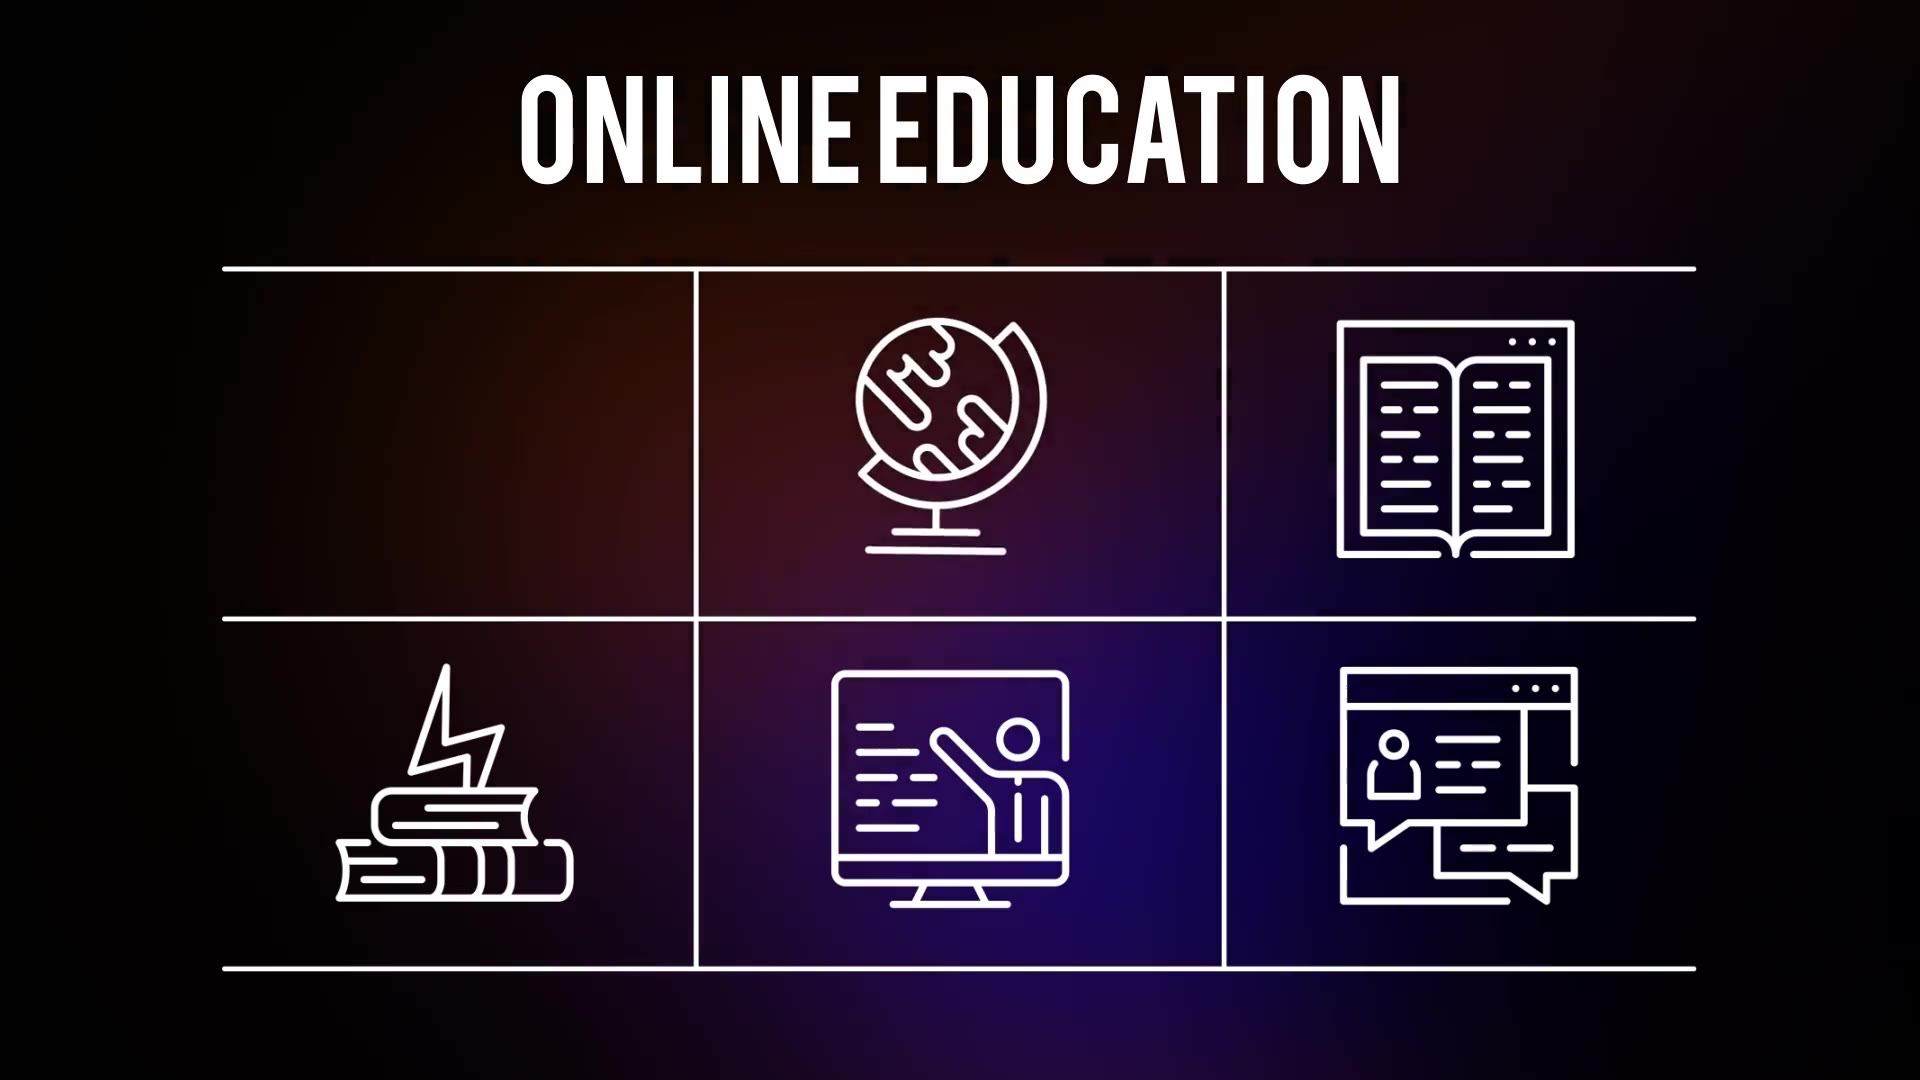 Online Education 25 Outline Icons - Download Videohive 23195069